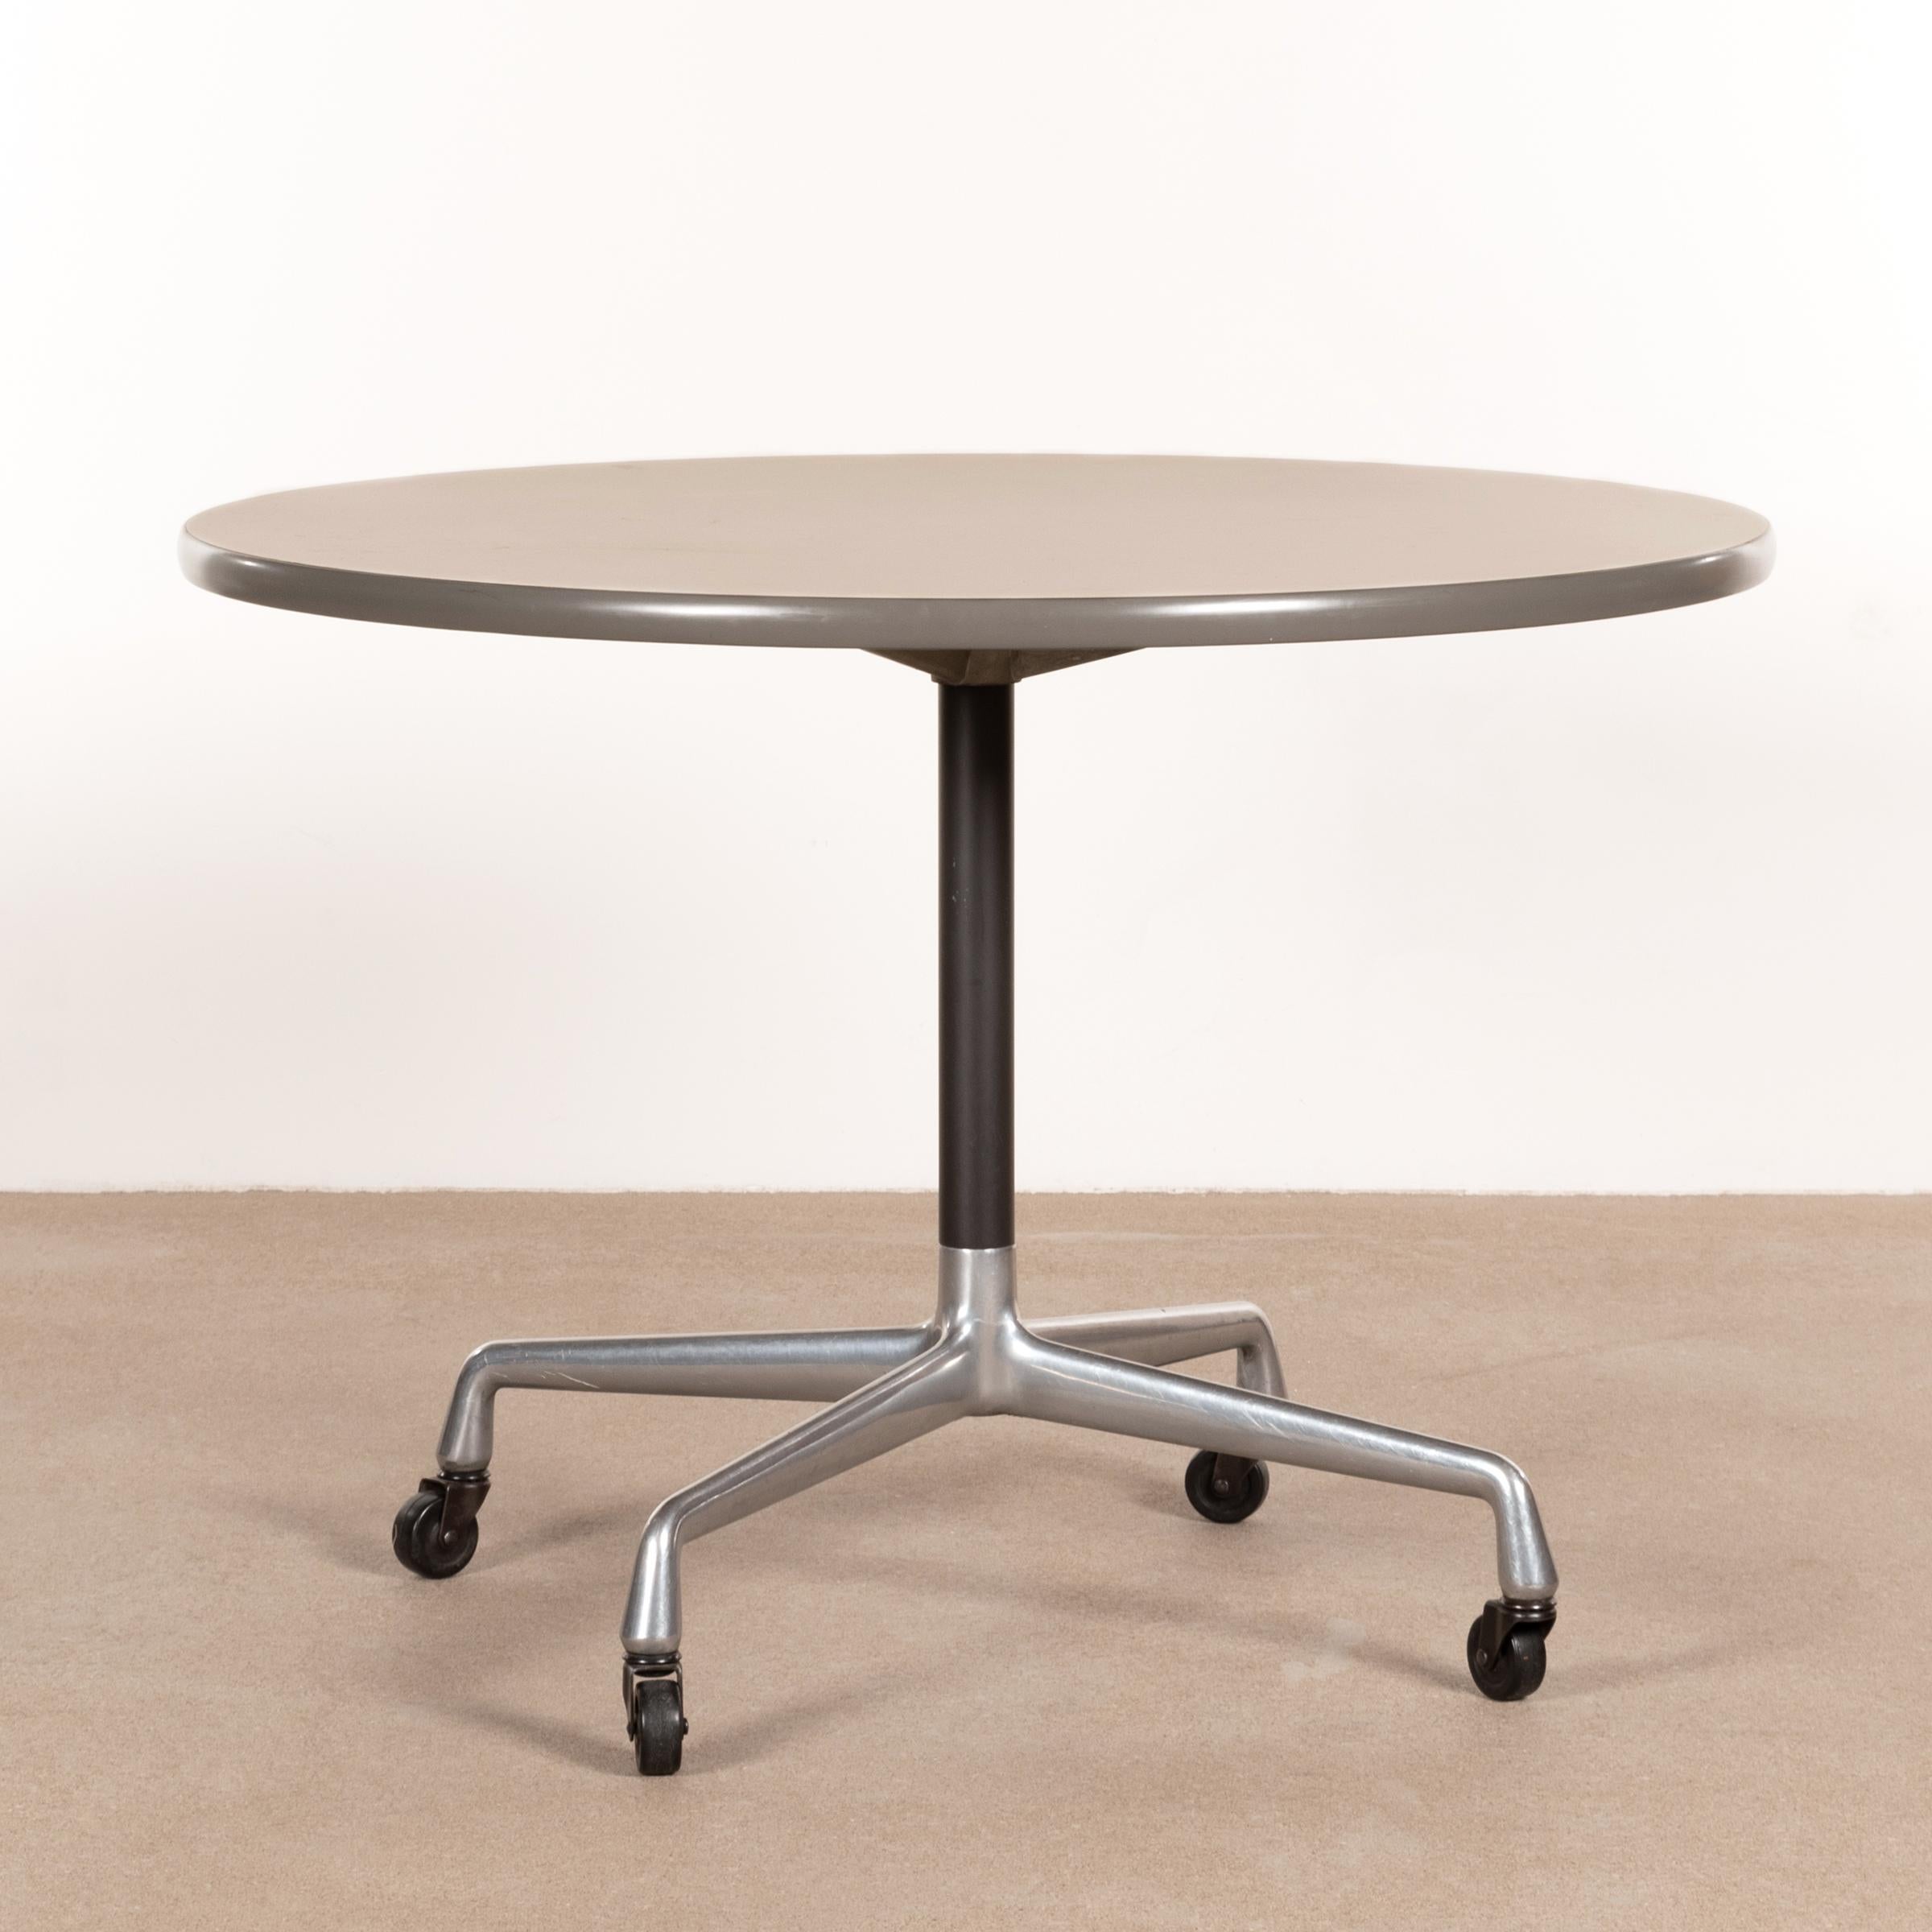 Easy to move small table from the Herman Miller Action Office Series (model AO084M8). Polished aluminum base with casters and formica table top in natural tone finished with a grey vinyl edge. All in good original condition with traces of use.